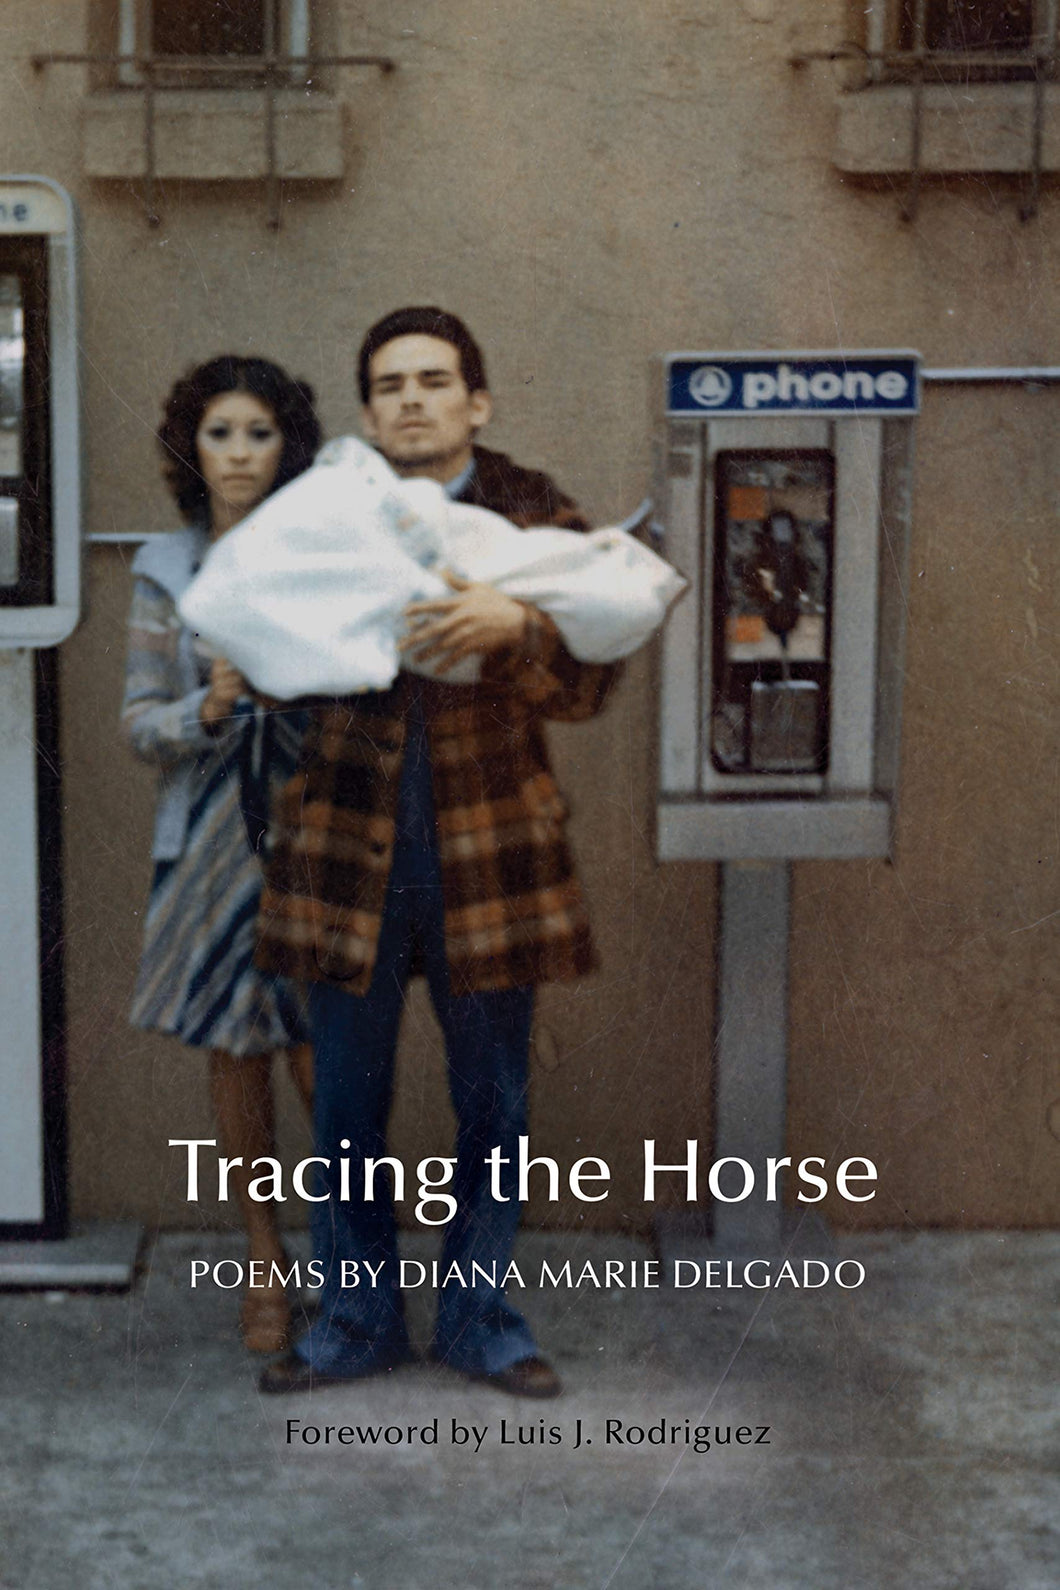 Tracing the Horse by Diana Marie Delgado